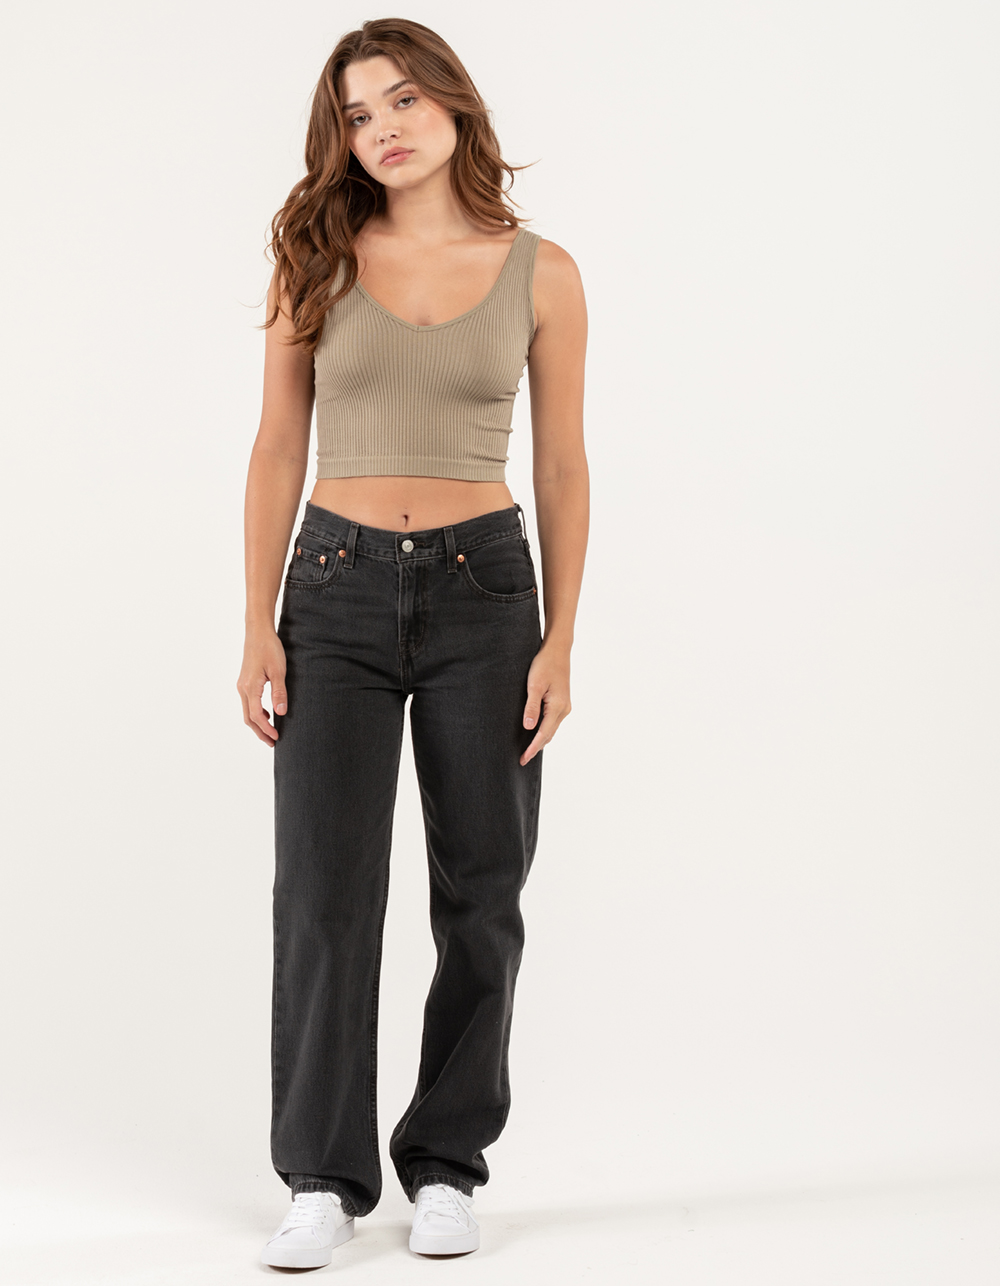 LEVI'S Low Pro Womens Jeans - WASHED BLACK | Tillys